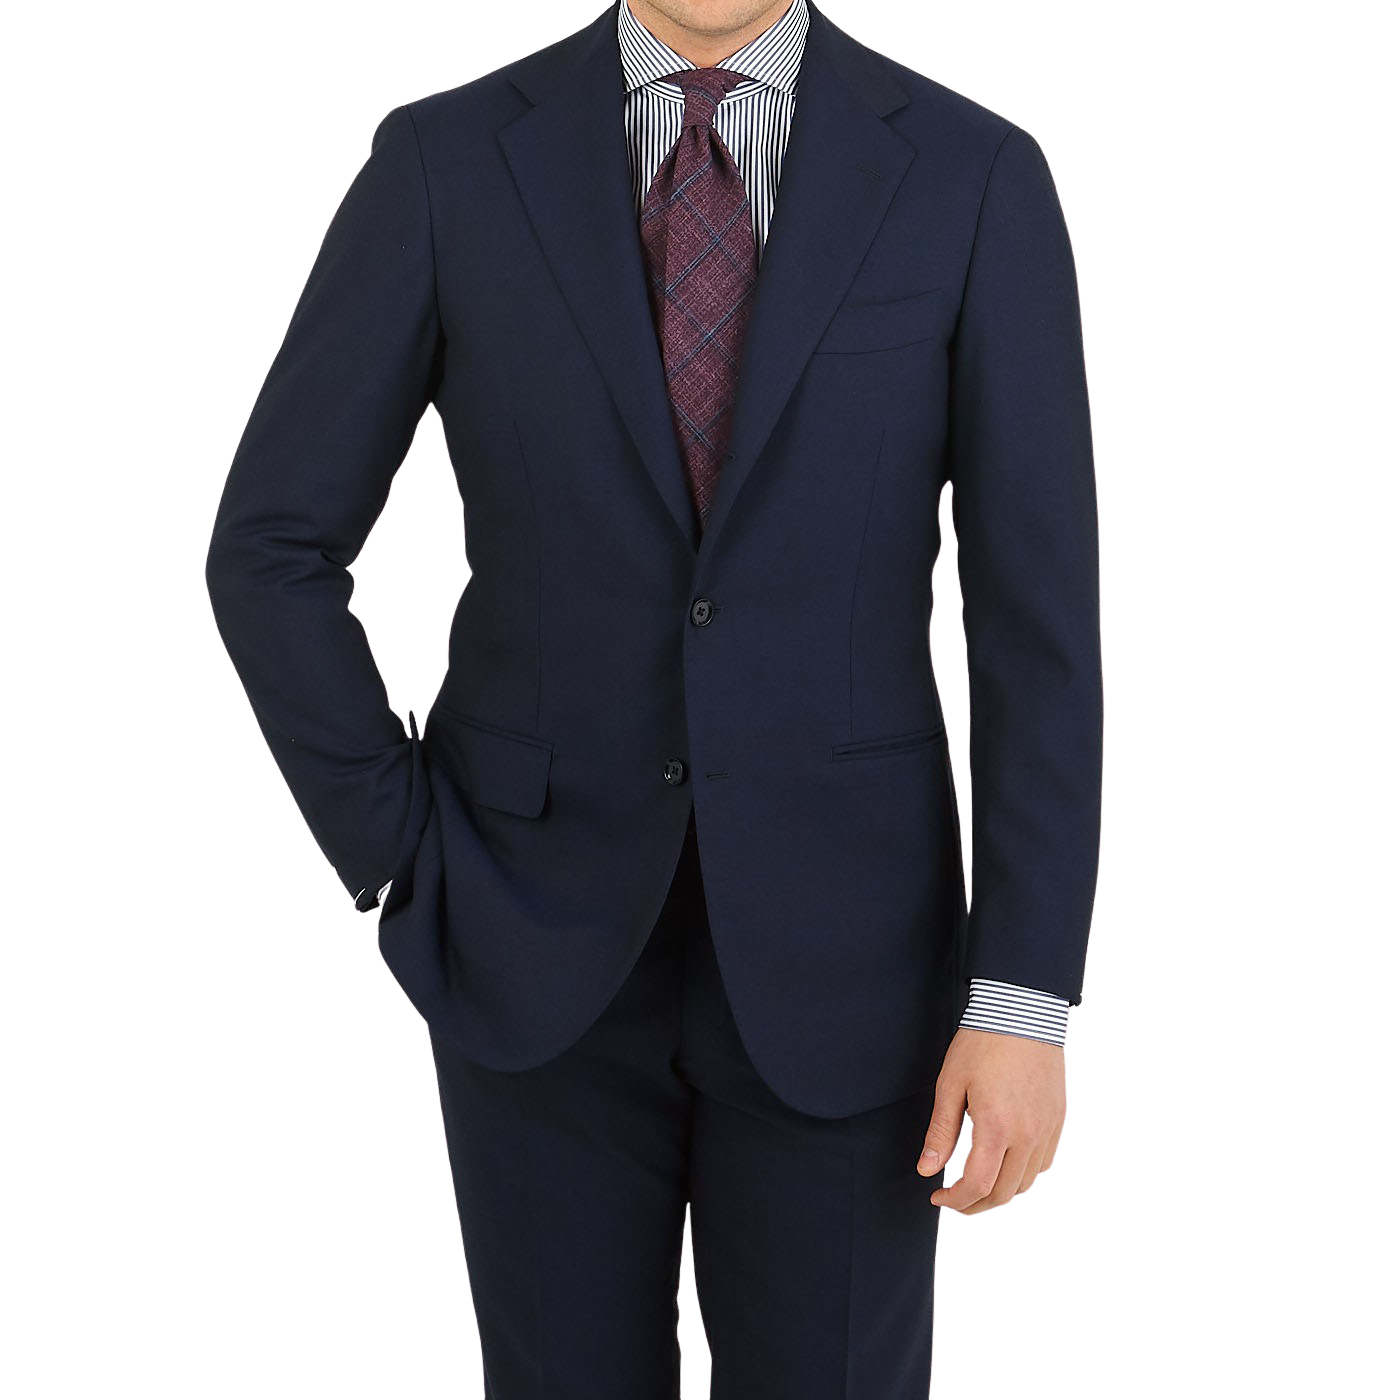 Suit Sleeve Length Guide | lupon.gov.ph